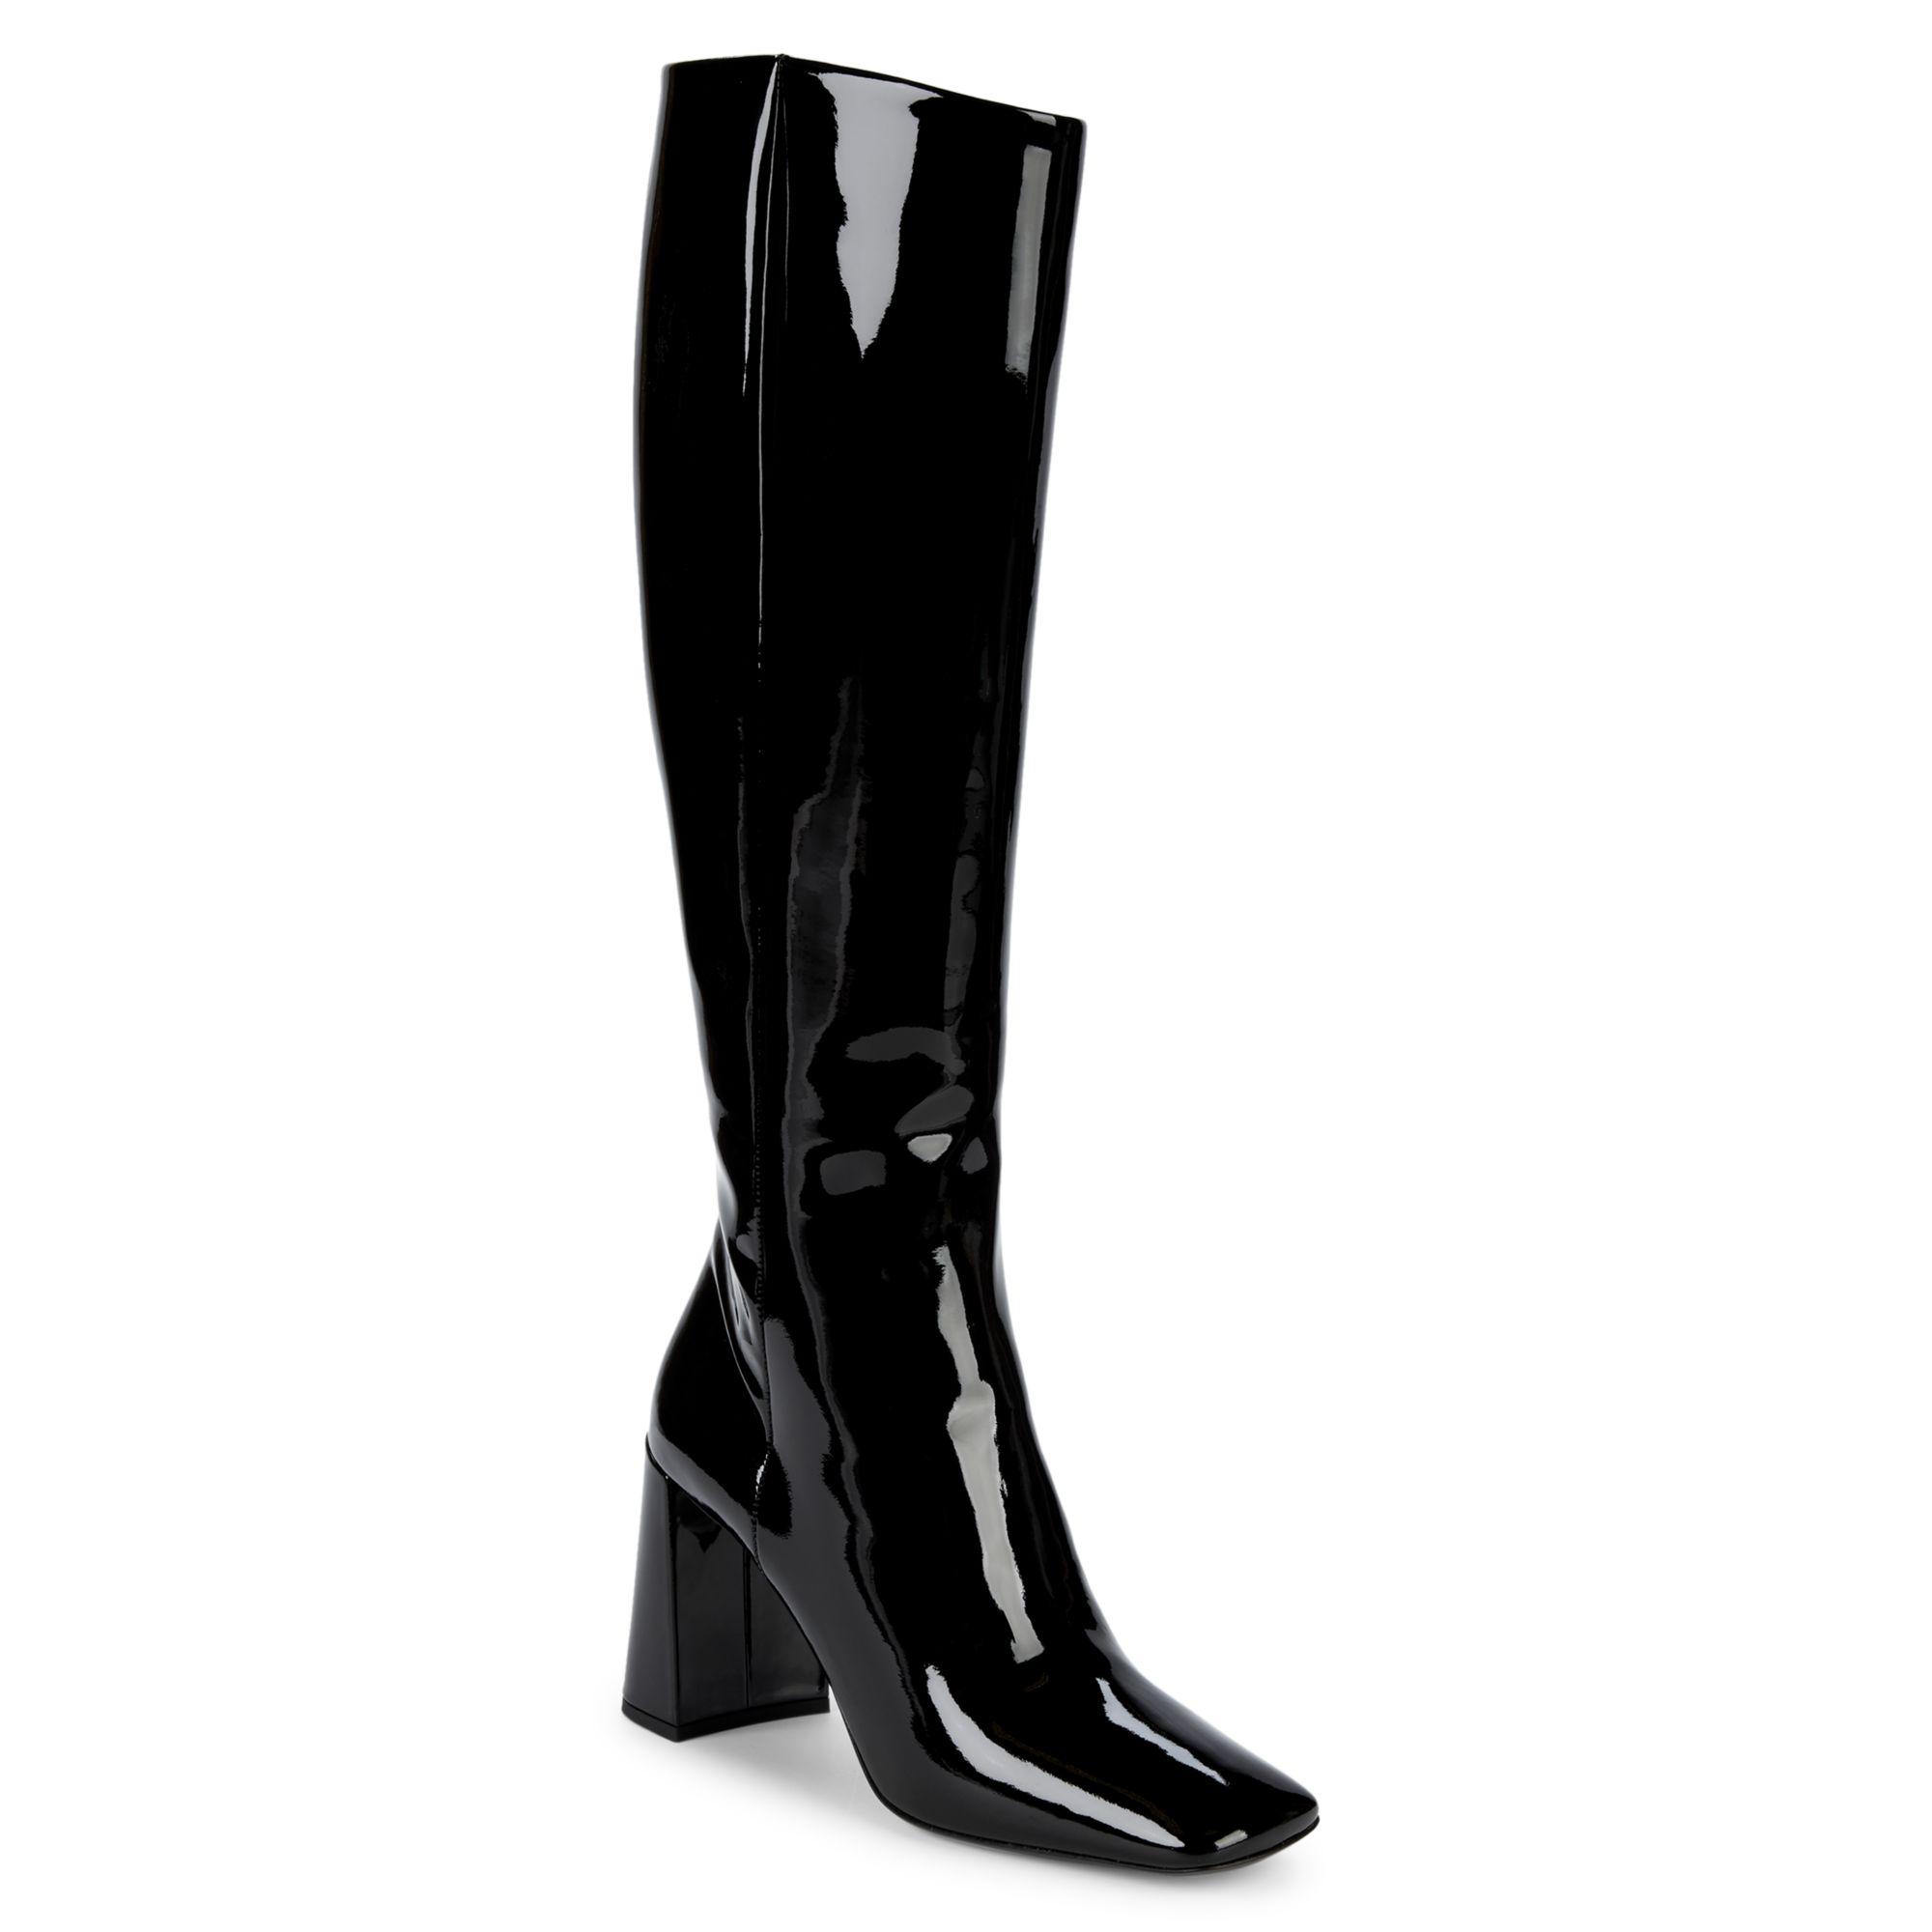 Prada Patent Leather Tall Boots in Black - Lyst